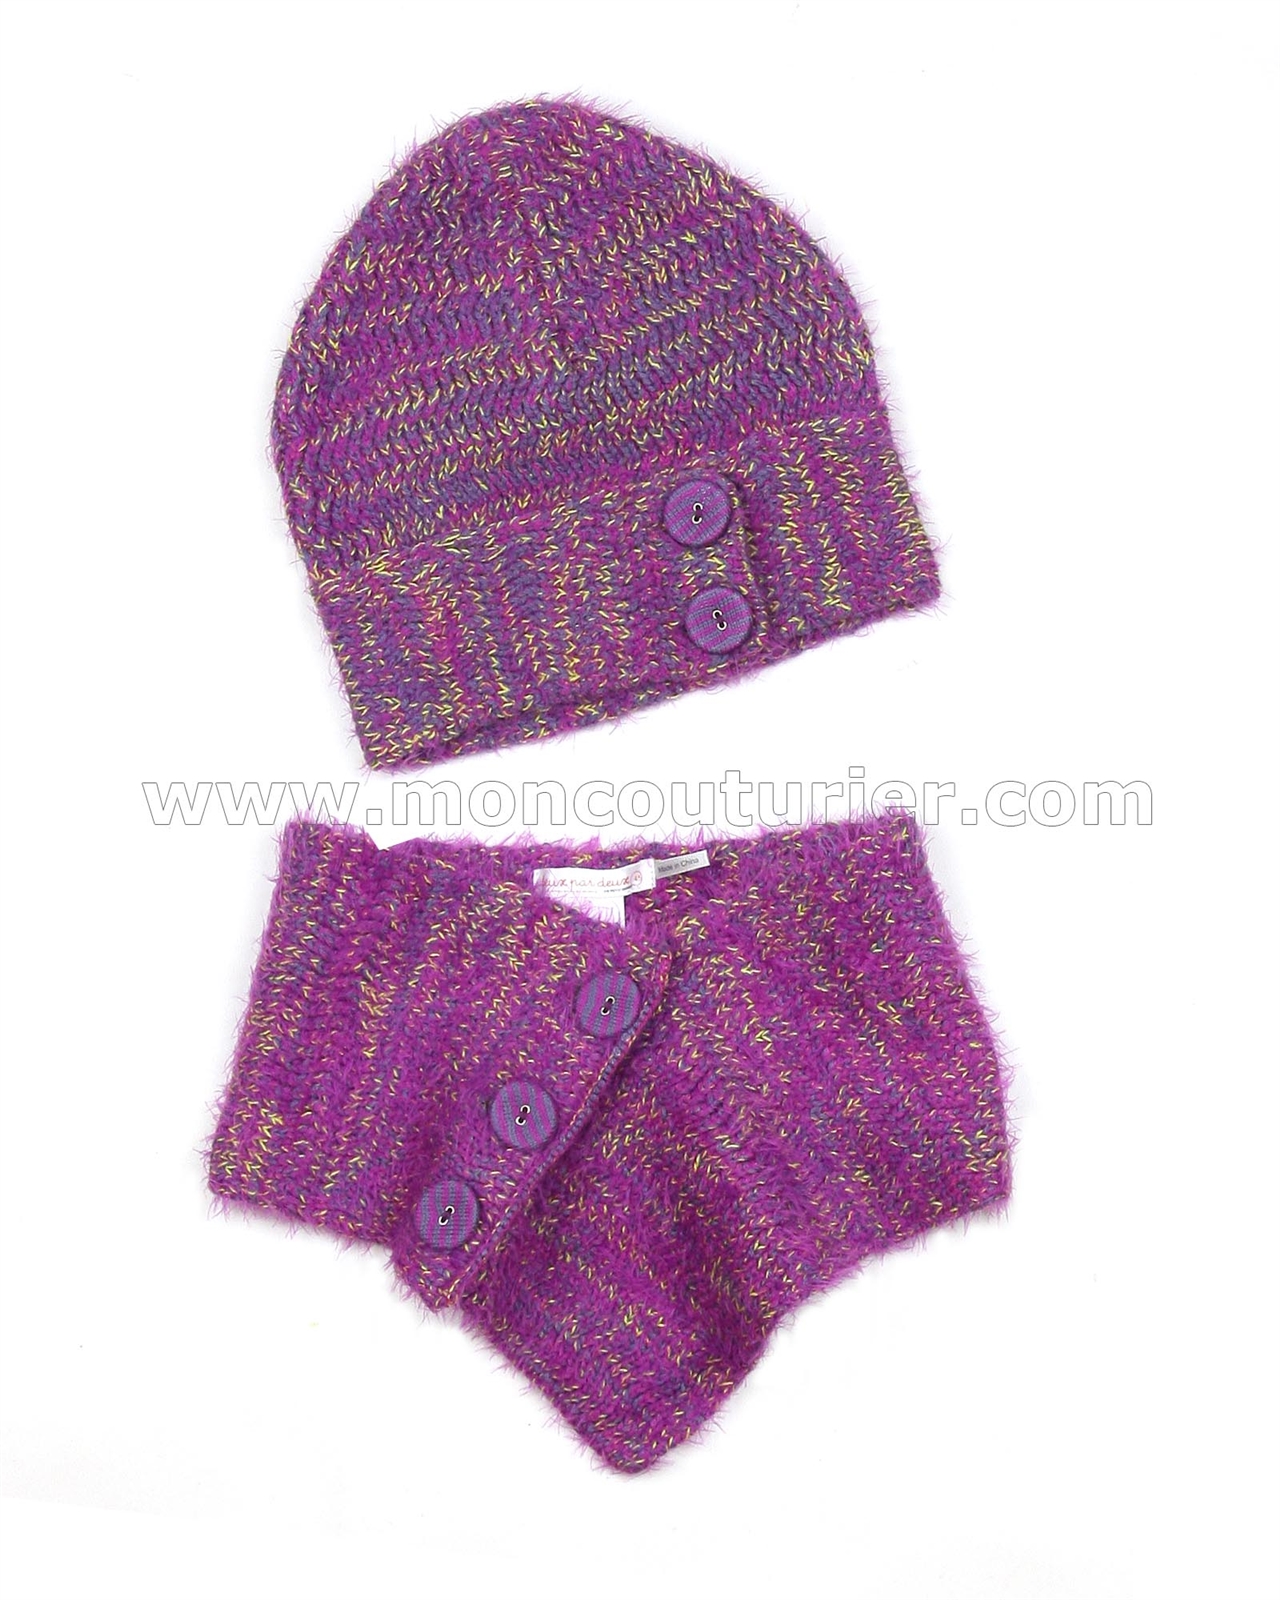 Sizes 6-14 Le Chic Girl's Hat and Scarf Set in Navy